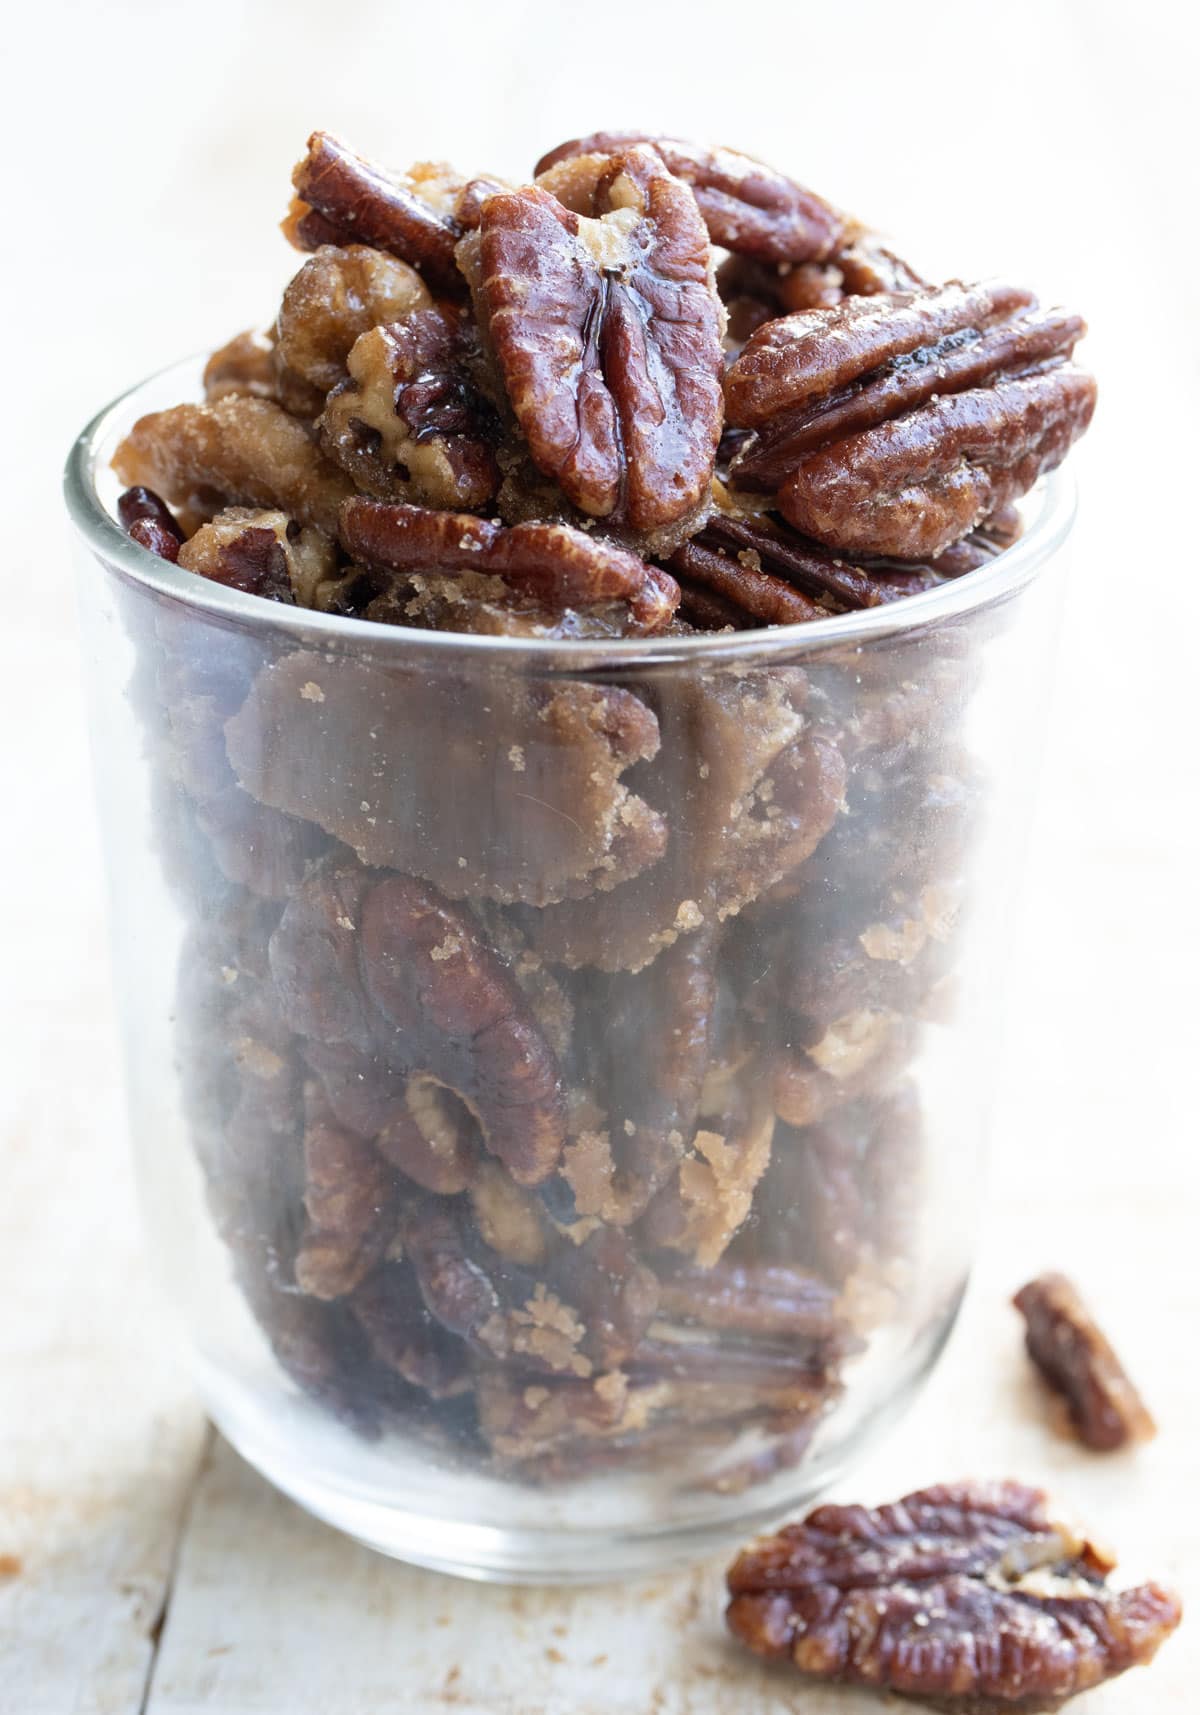 Candied pecans in a glass.